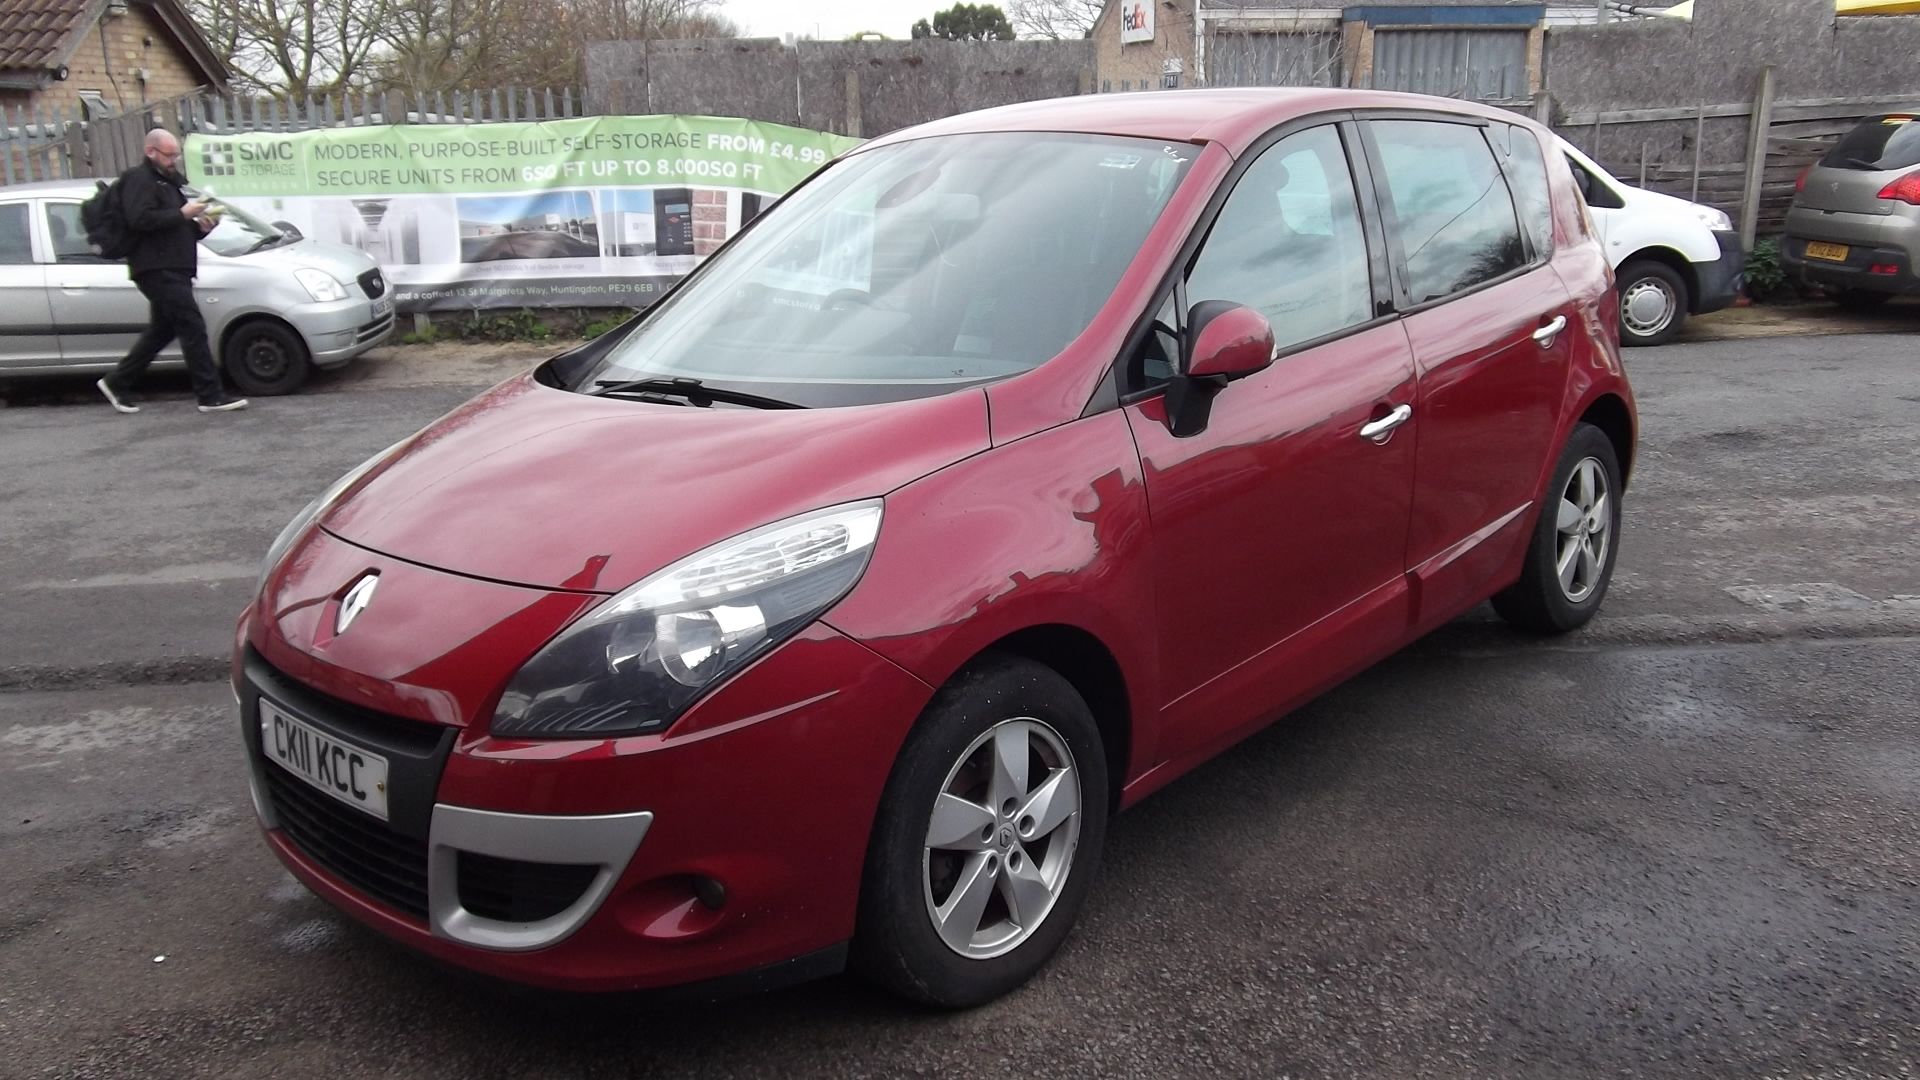 2011 Renault Scenic 1.5 DCI Dynamique Tom Tom 5 Door MPV - Image 17 of 17